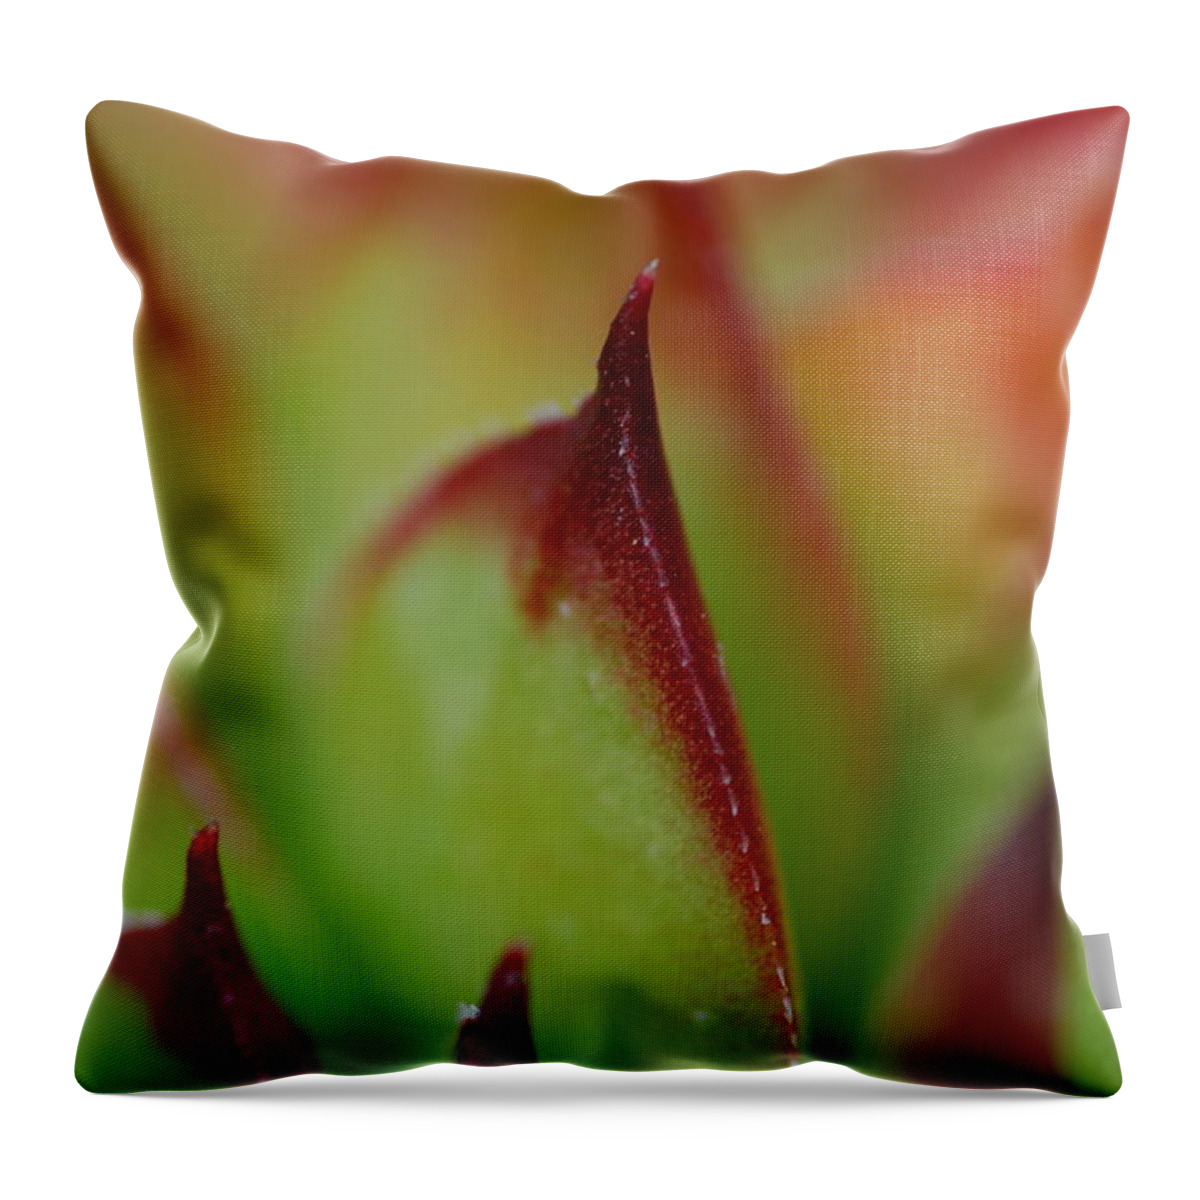 Hens And Chicks Throw Pillow featuring the photograph Hens And Chicks #9 by Stephanie Gambini